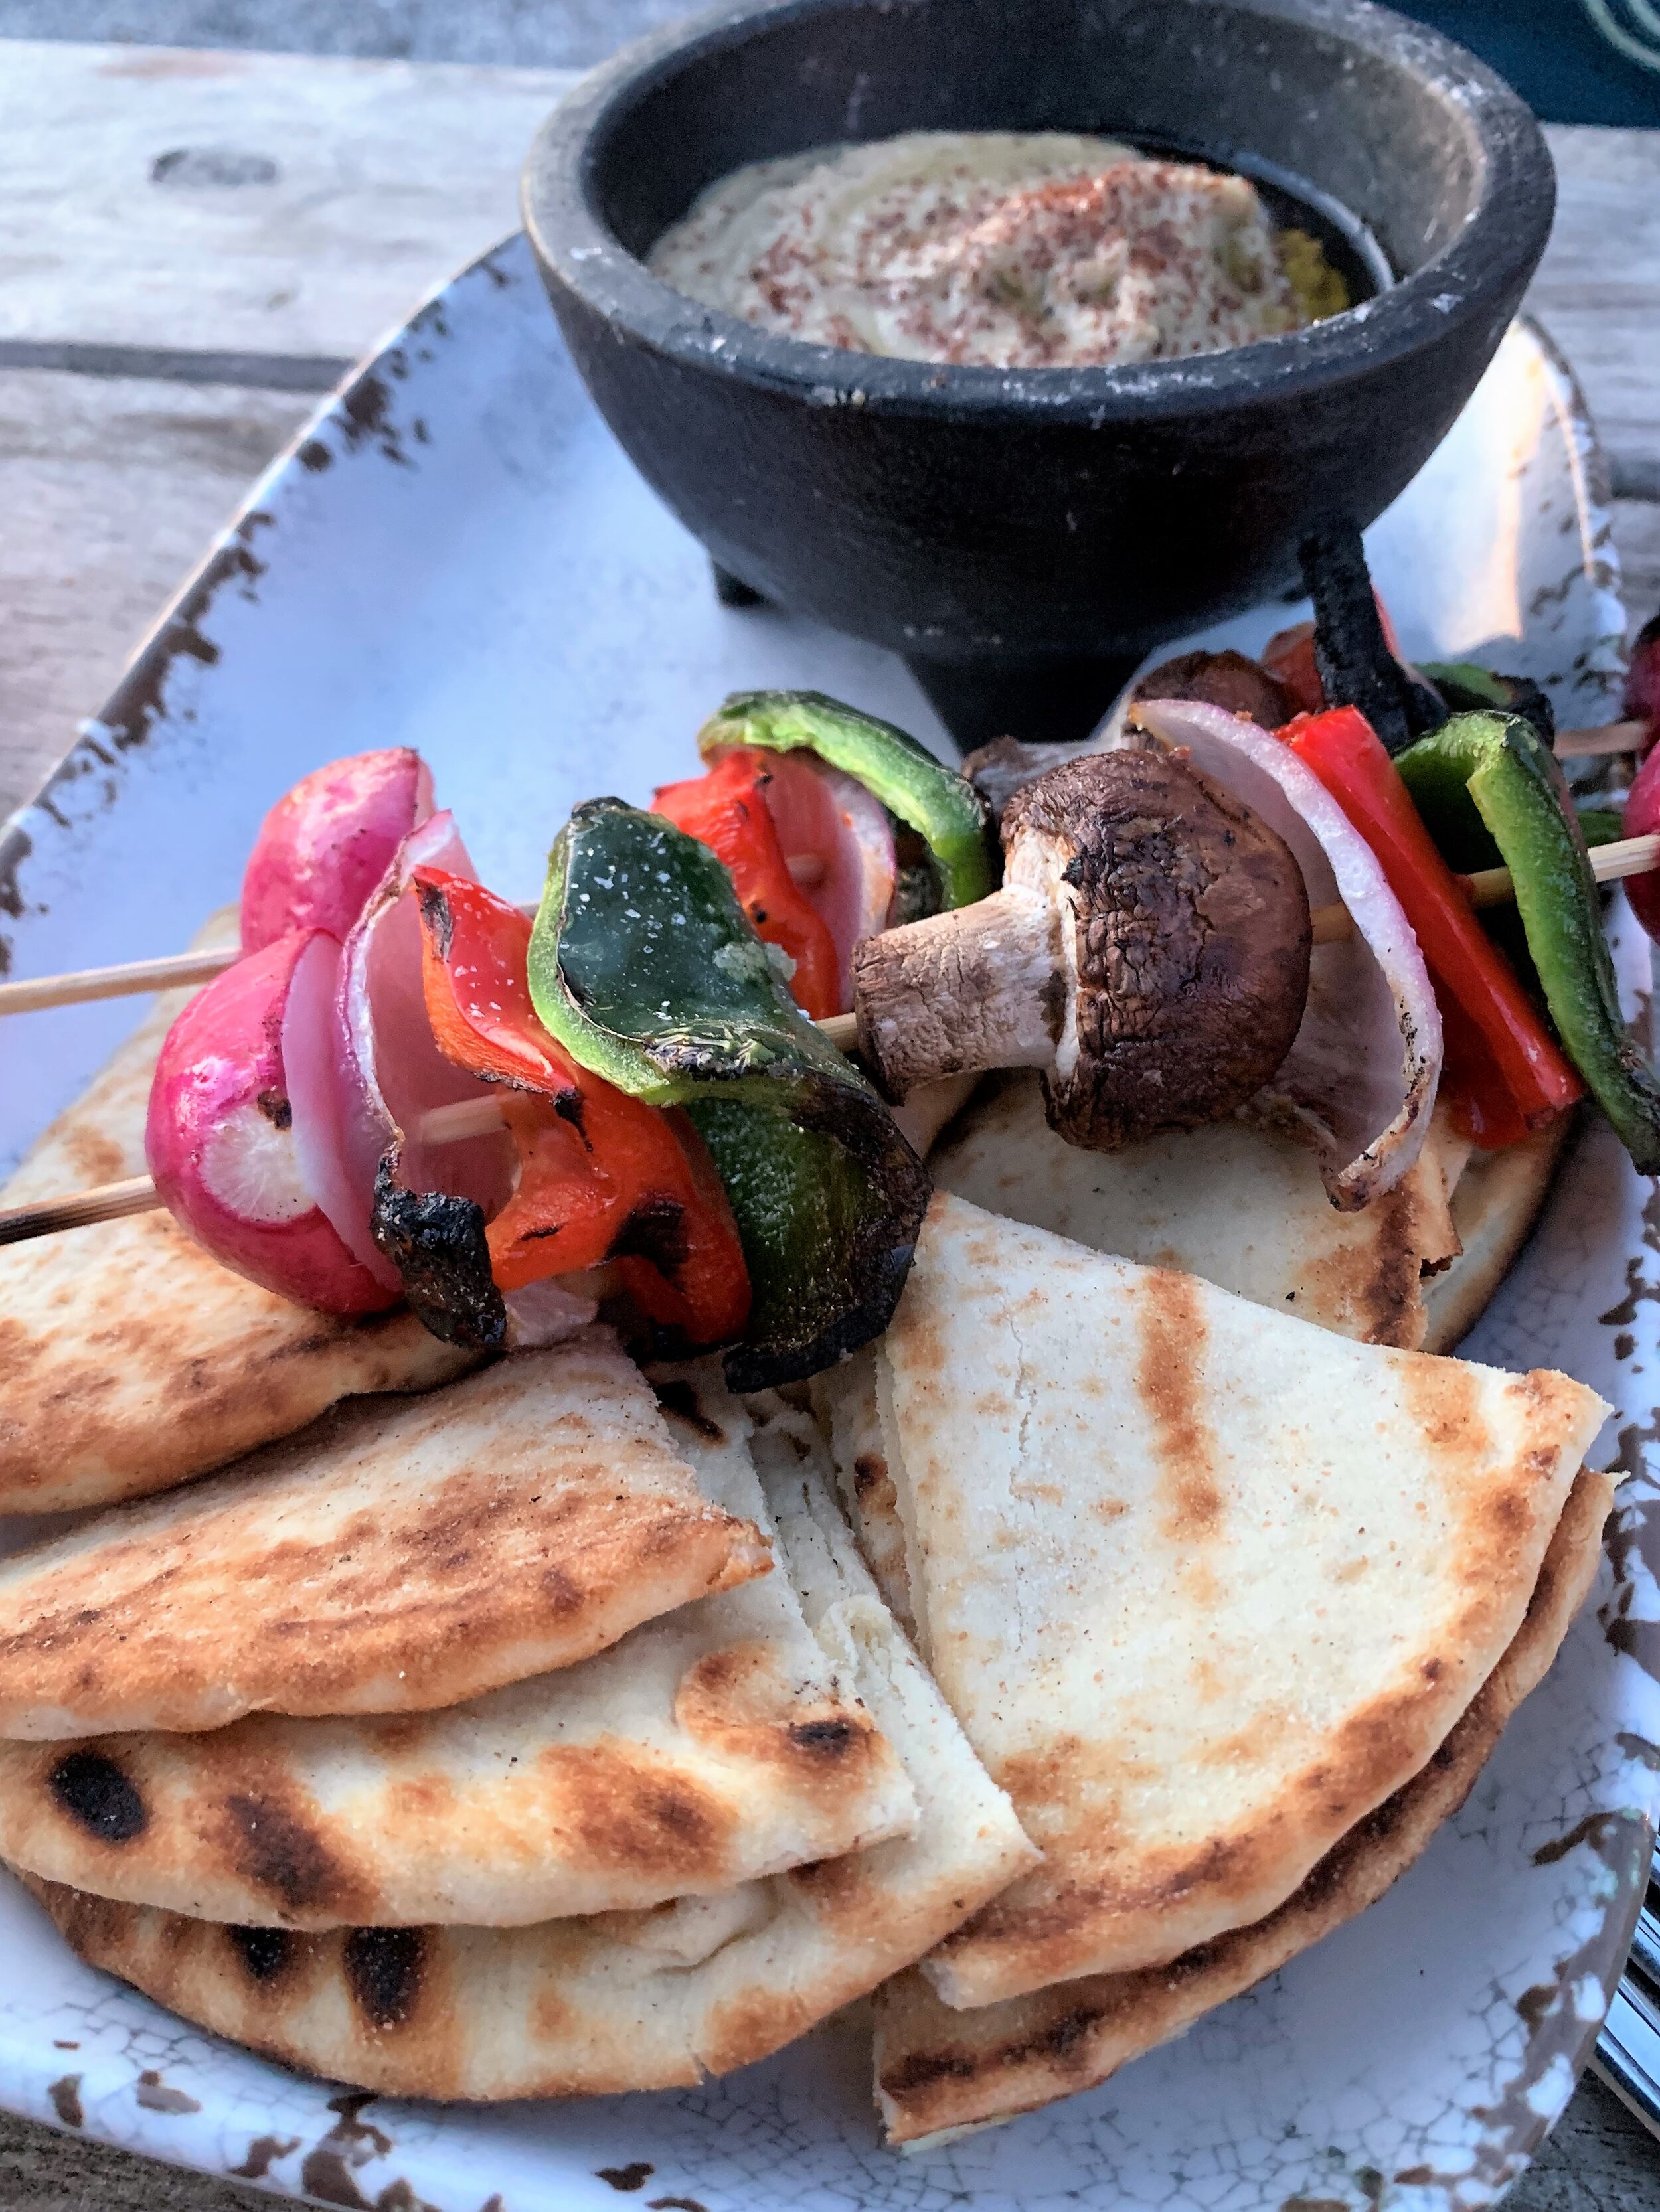 vegetable skewers and flatbread on a plate in front of roasted eggplant dip in a bowl